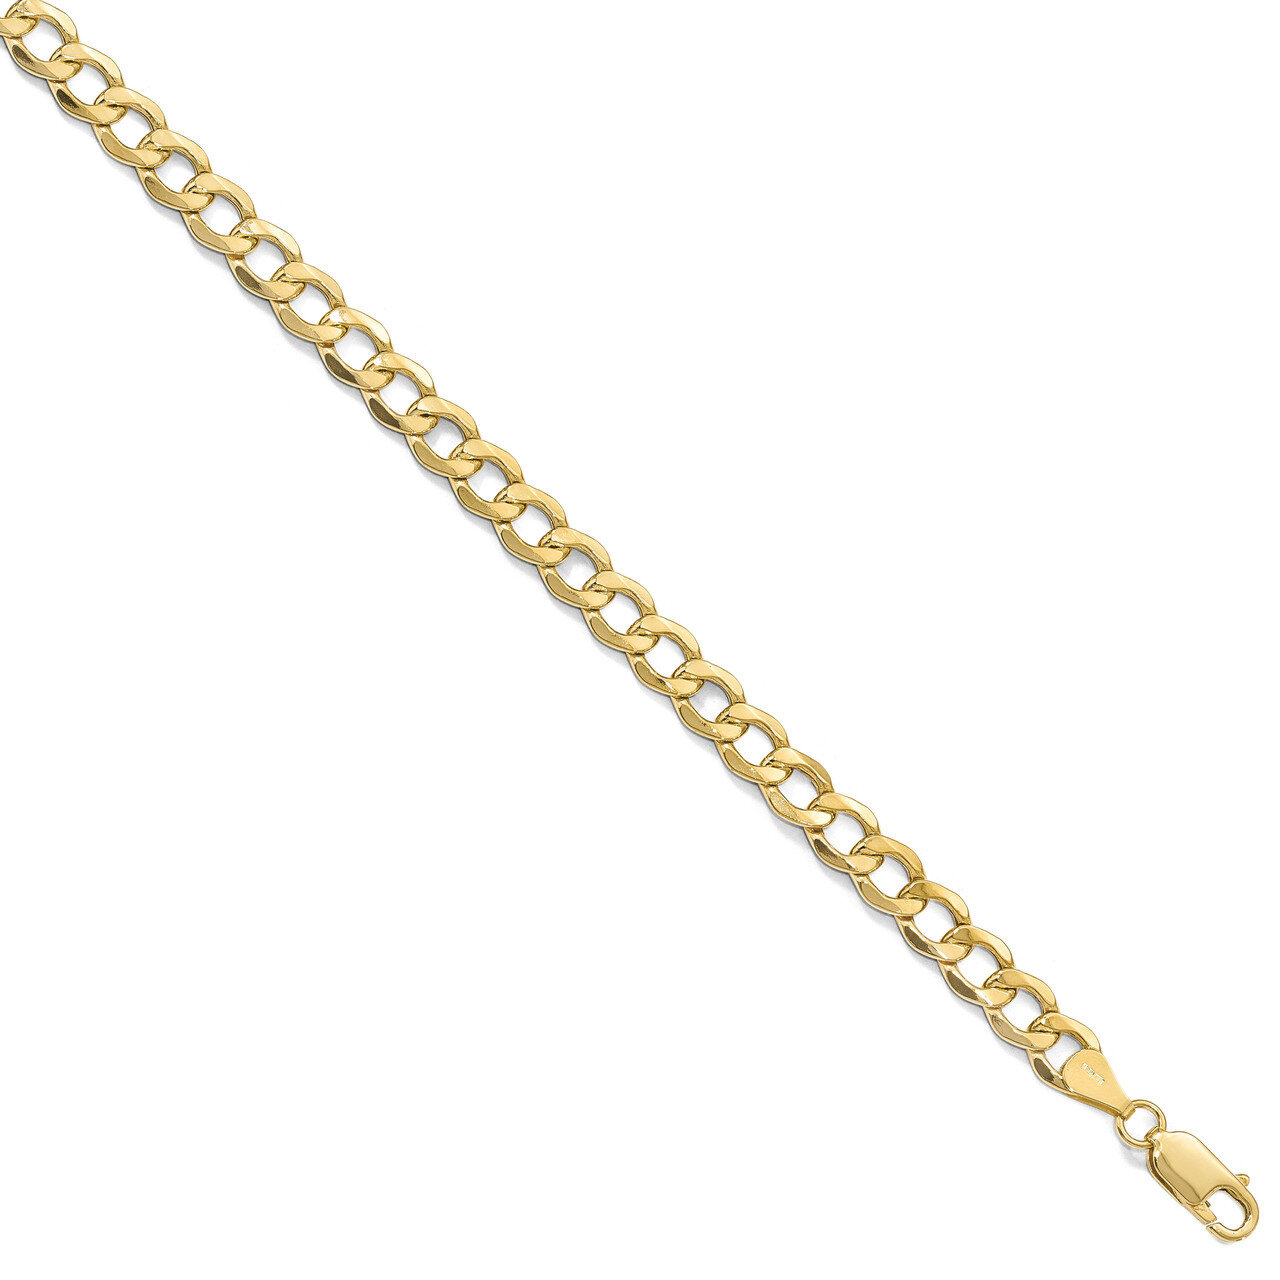 6.5mm Semi-Solid Curb Link Chain 18 Inch 10k Gold HB-8242-18